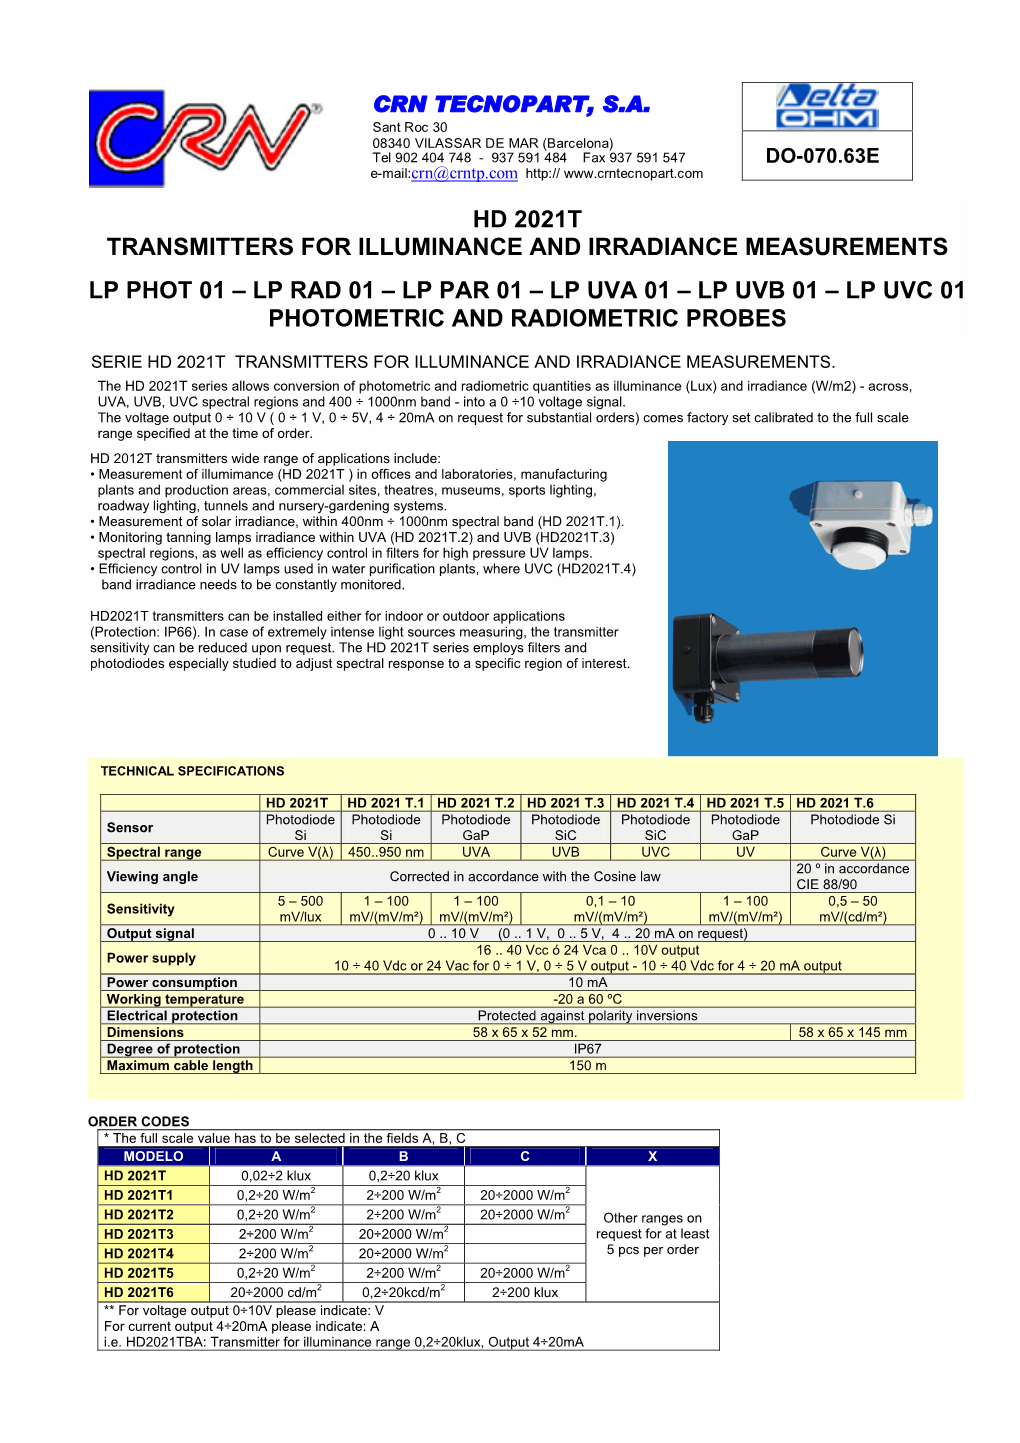 Hd 2021T Transmitters for Illuminance and Irradiance Measurements